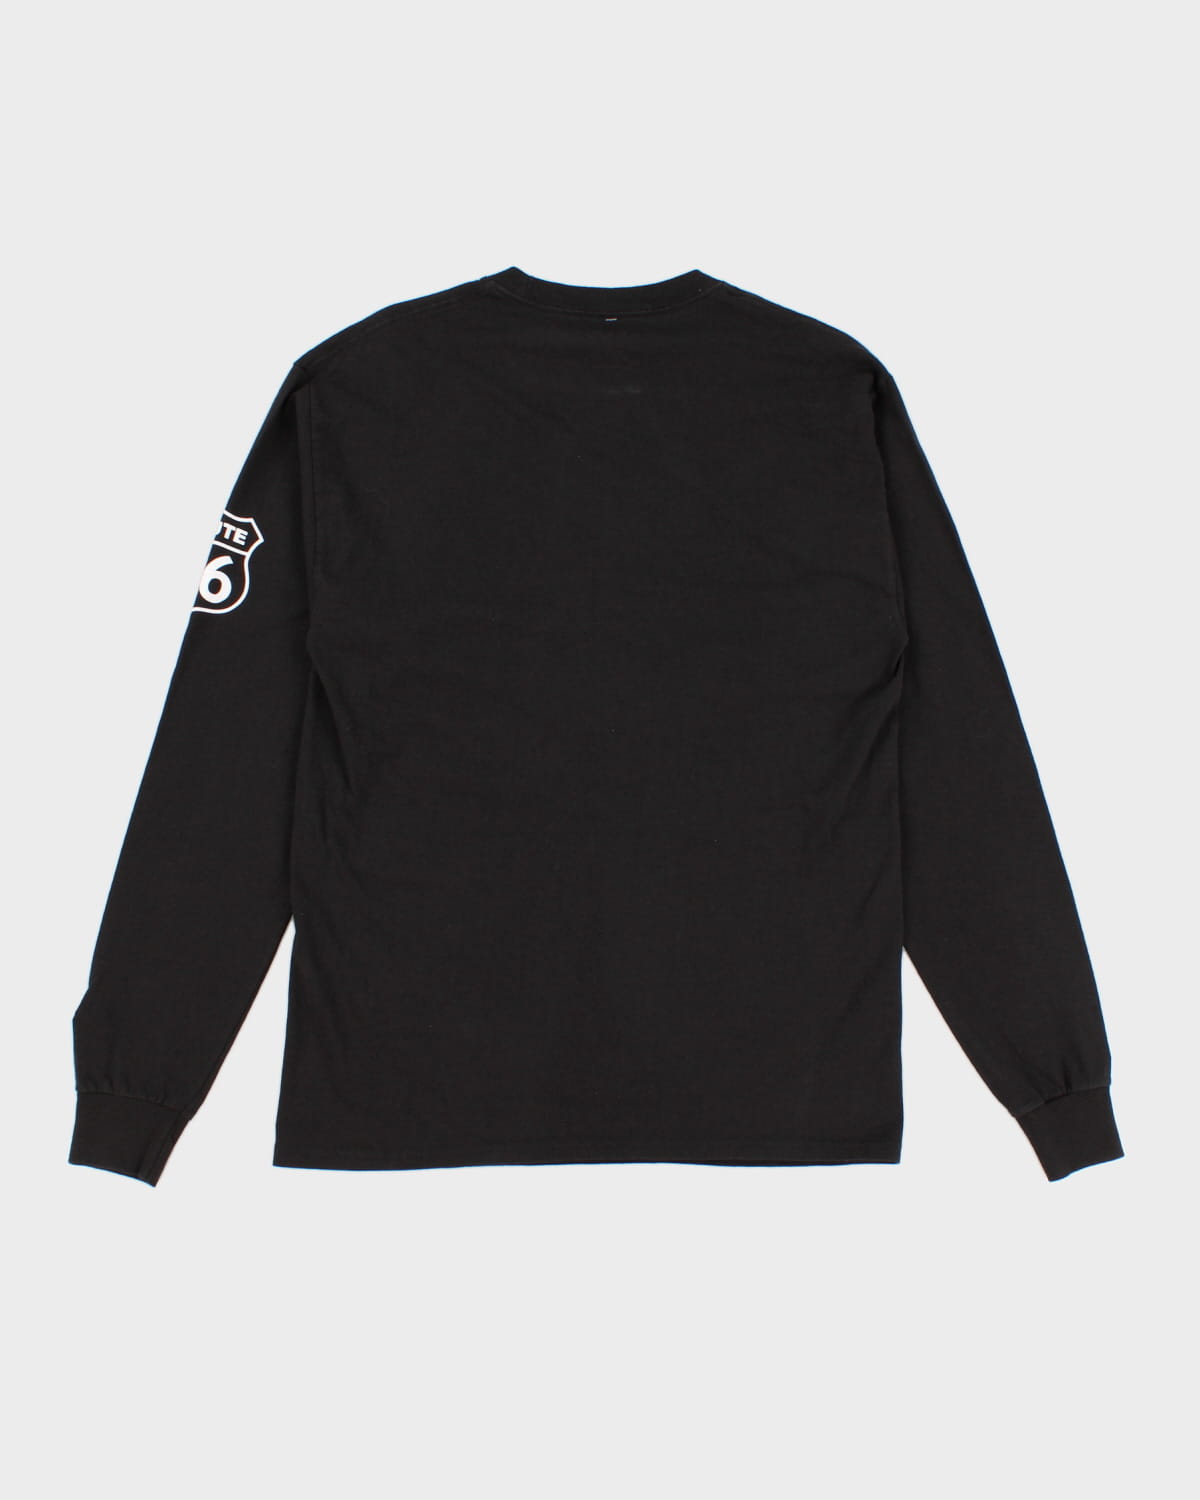 Route 66 Champion Long Sleeve - M